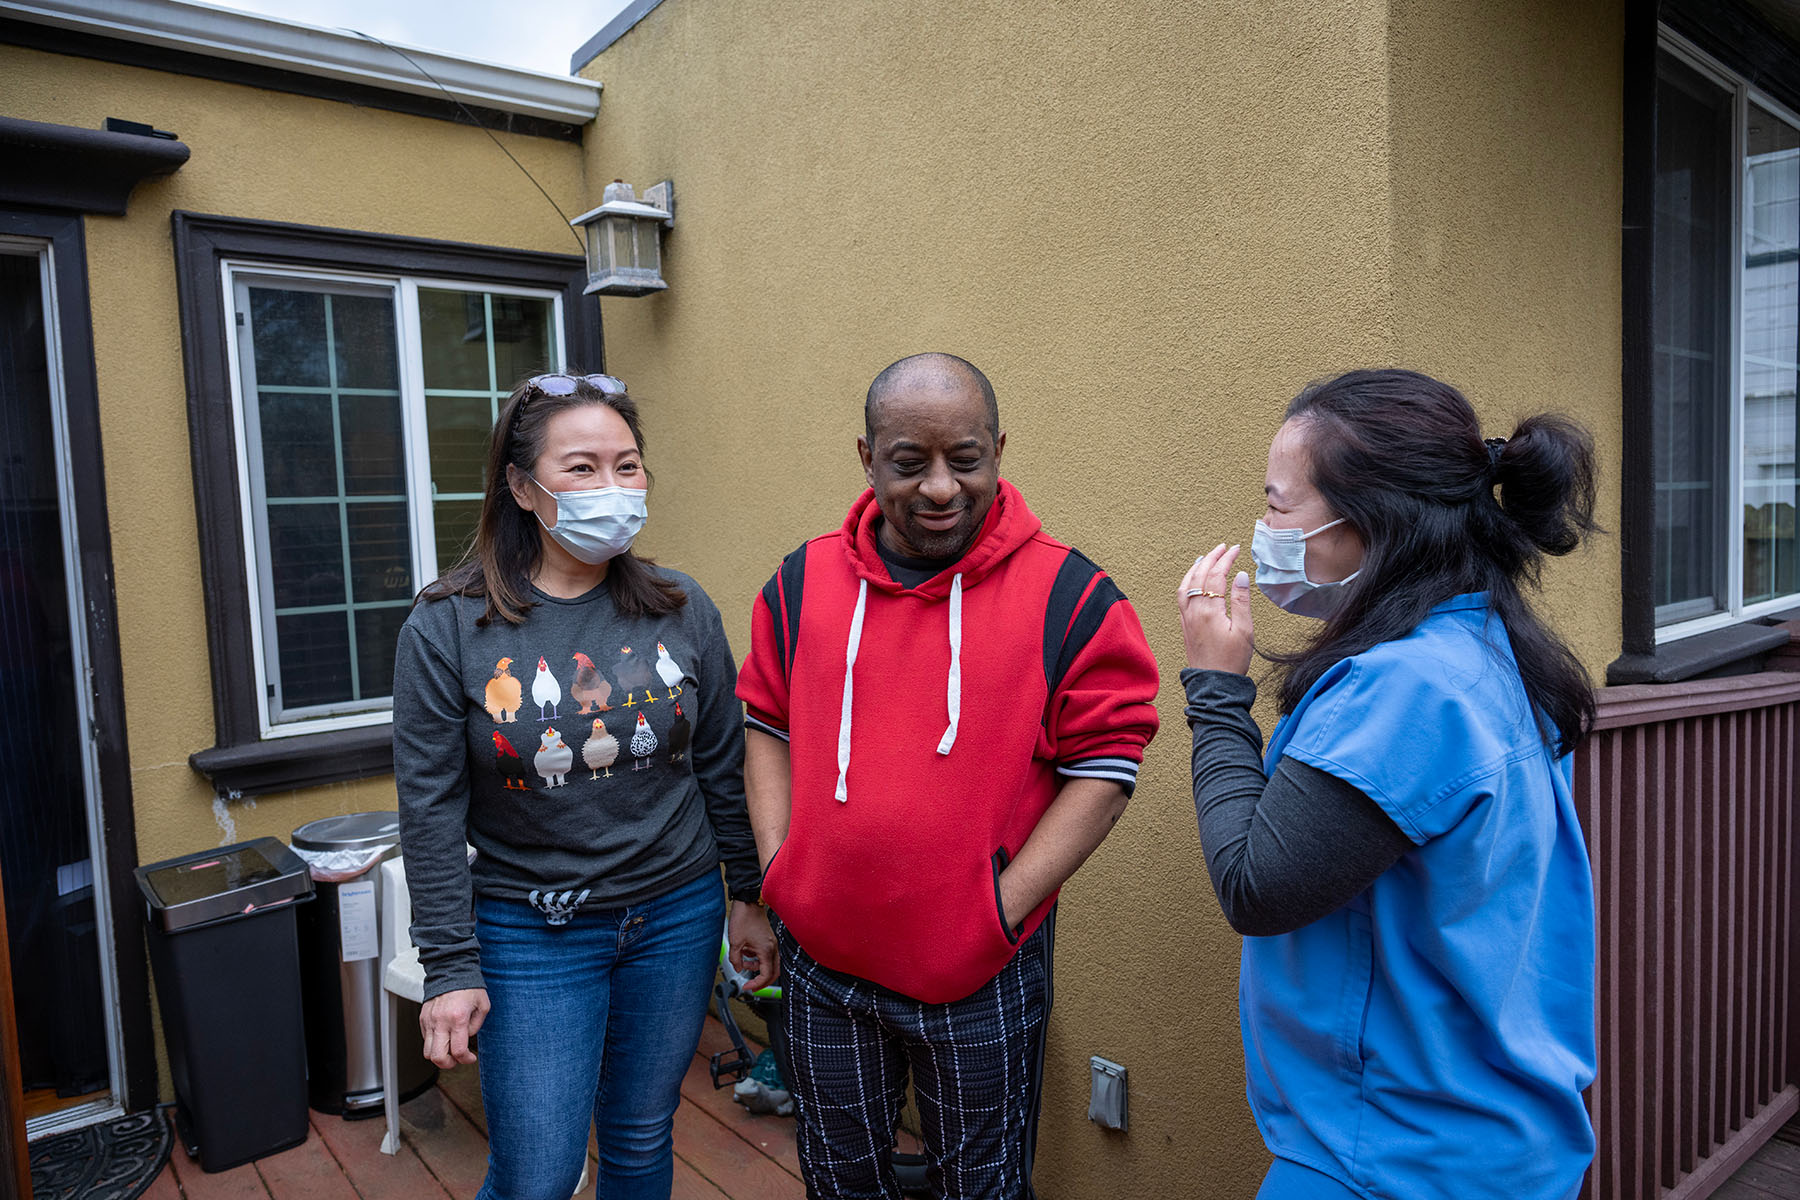 Patient Russell Hughes laughs and jokes with his in-home nurses.